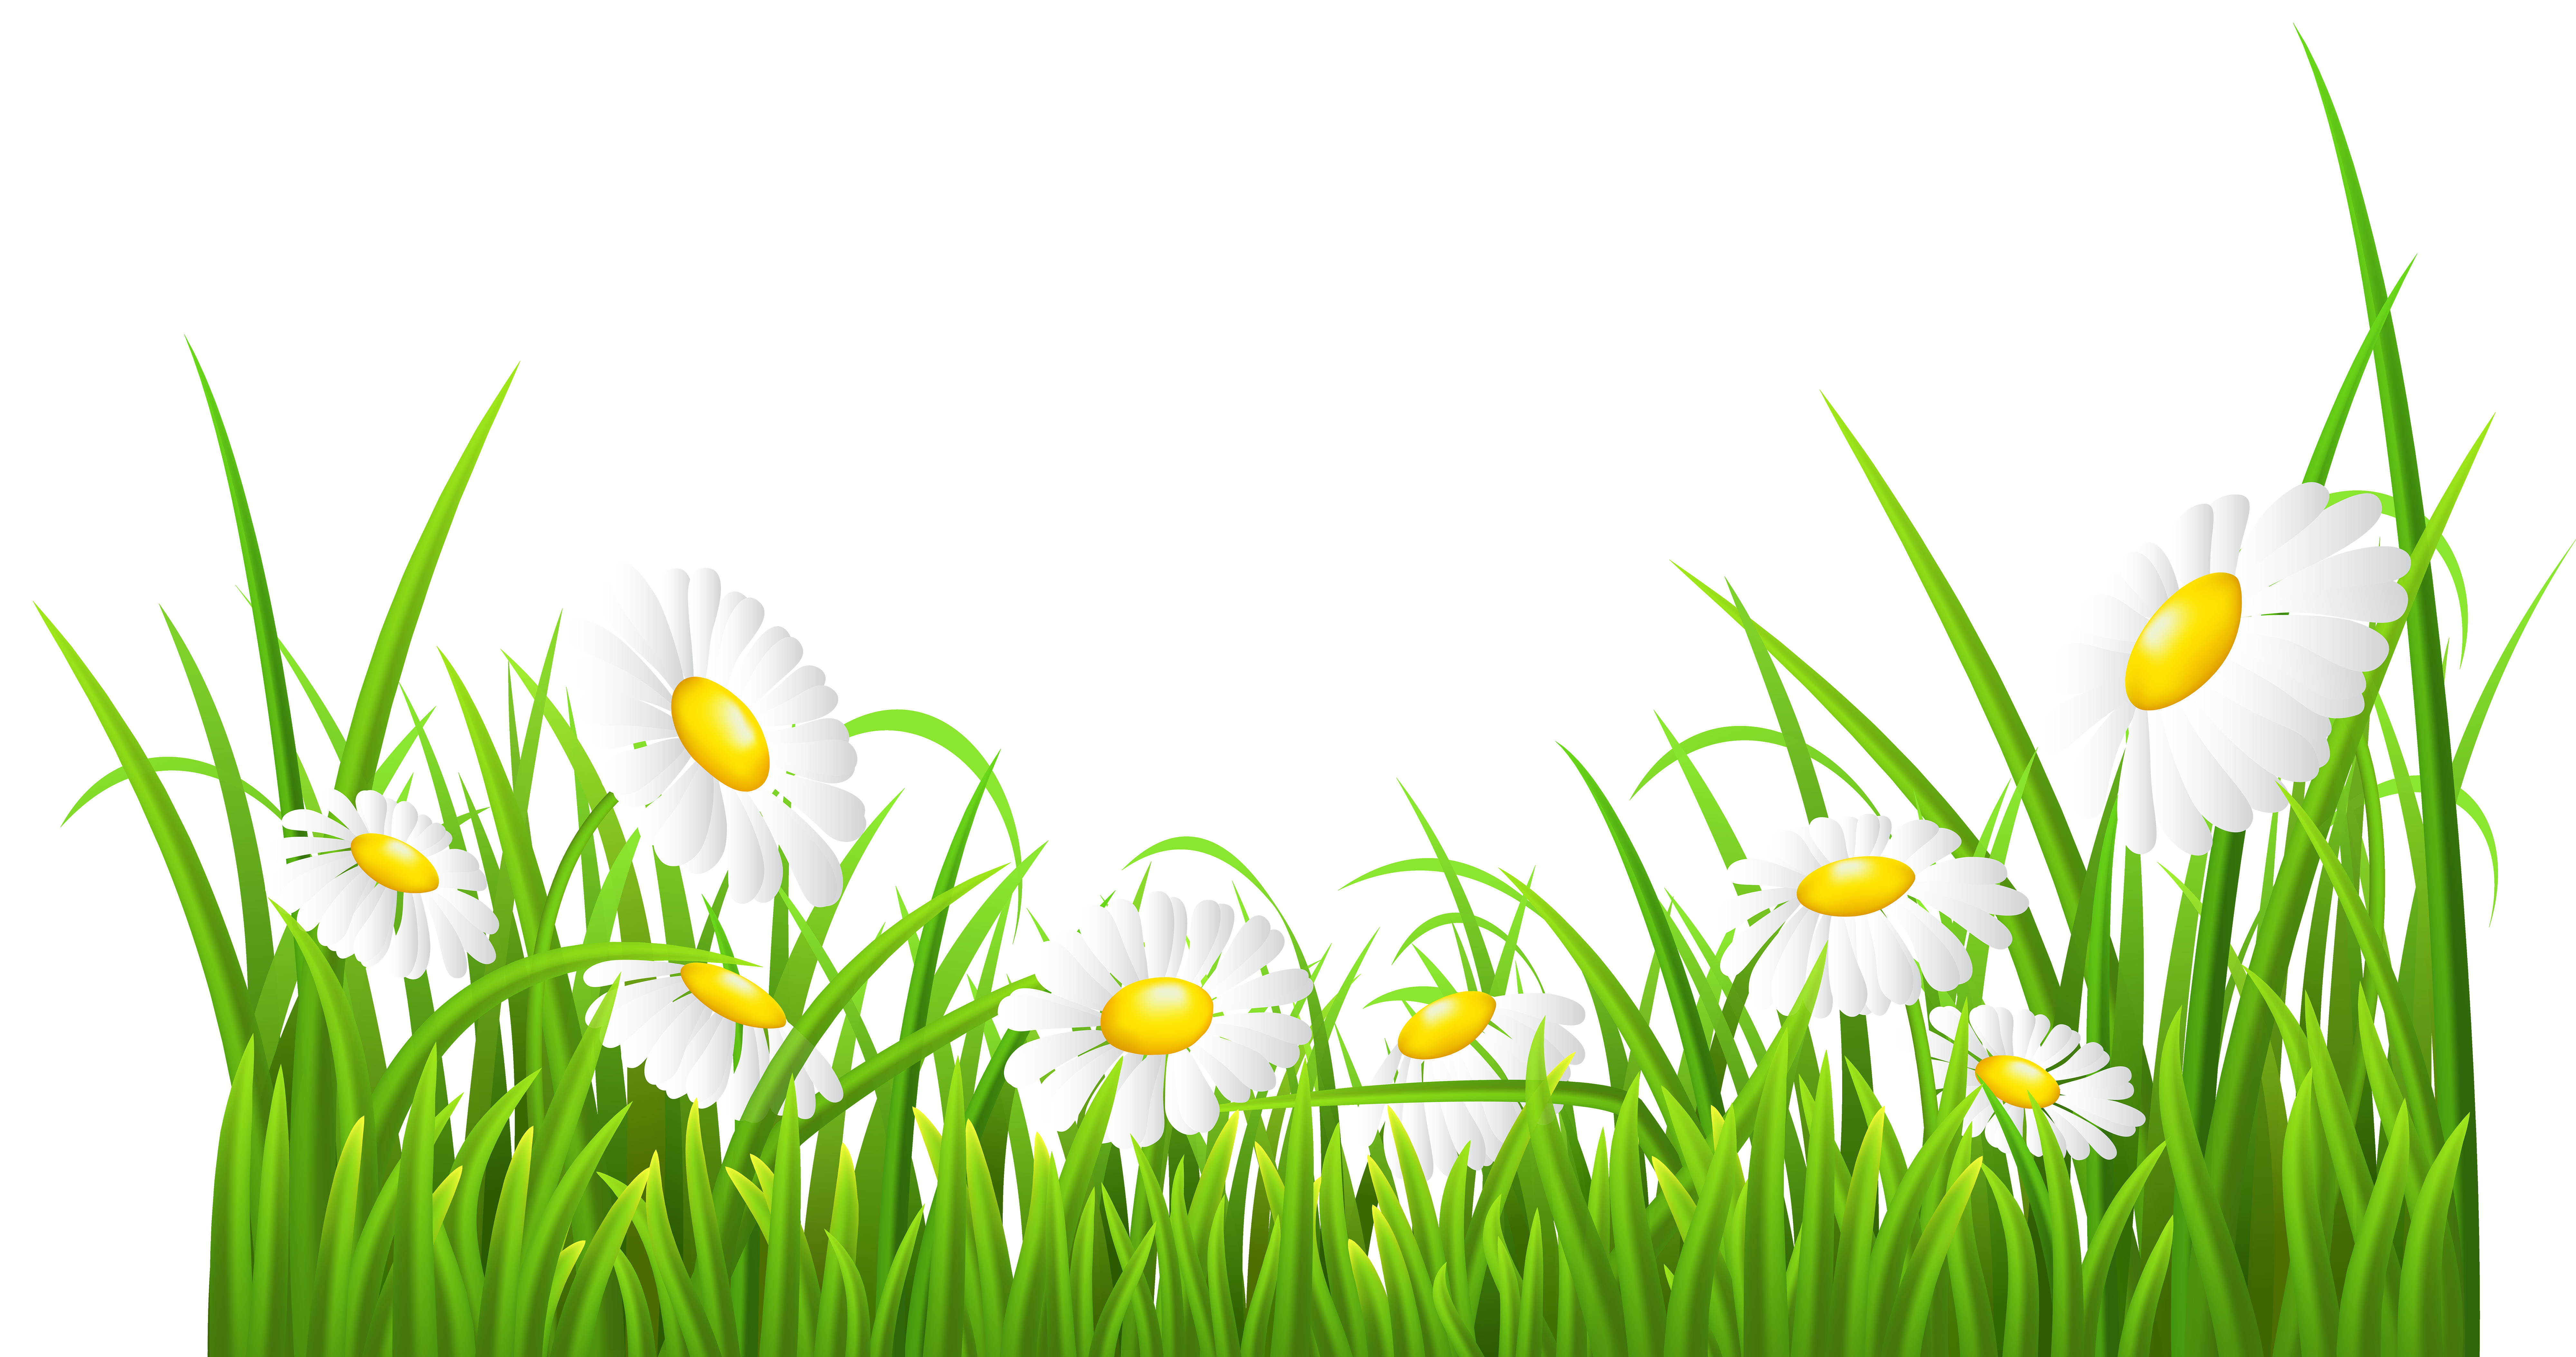 Clipart rock nature. White daisies and grass